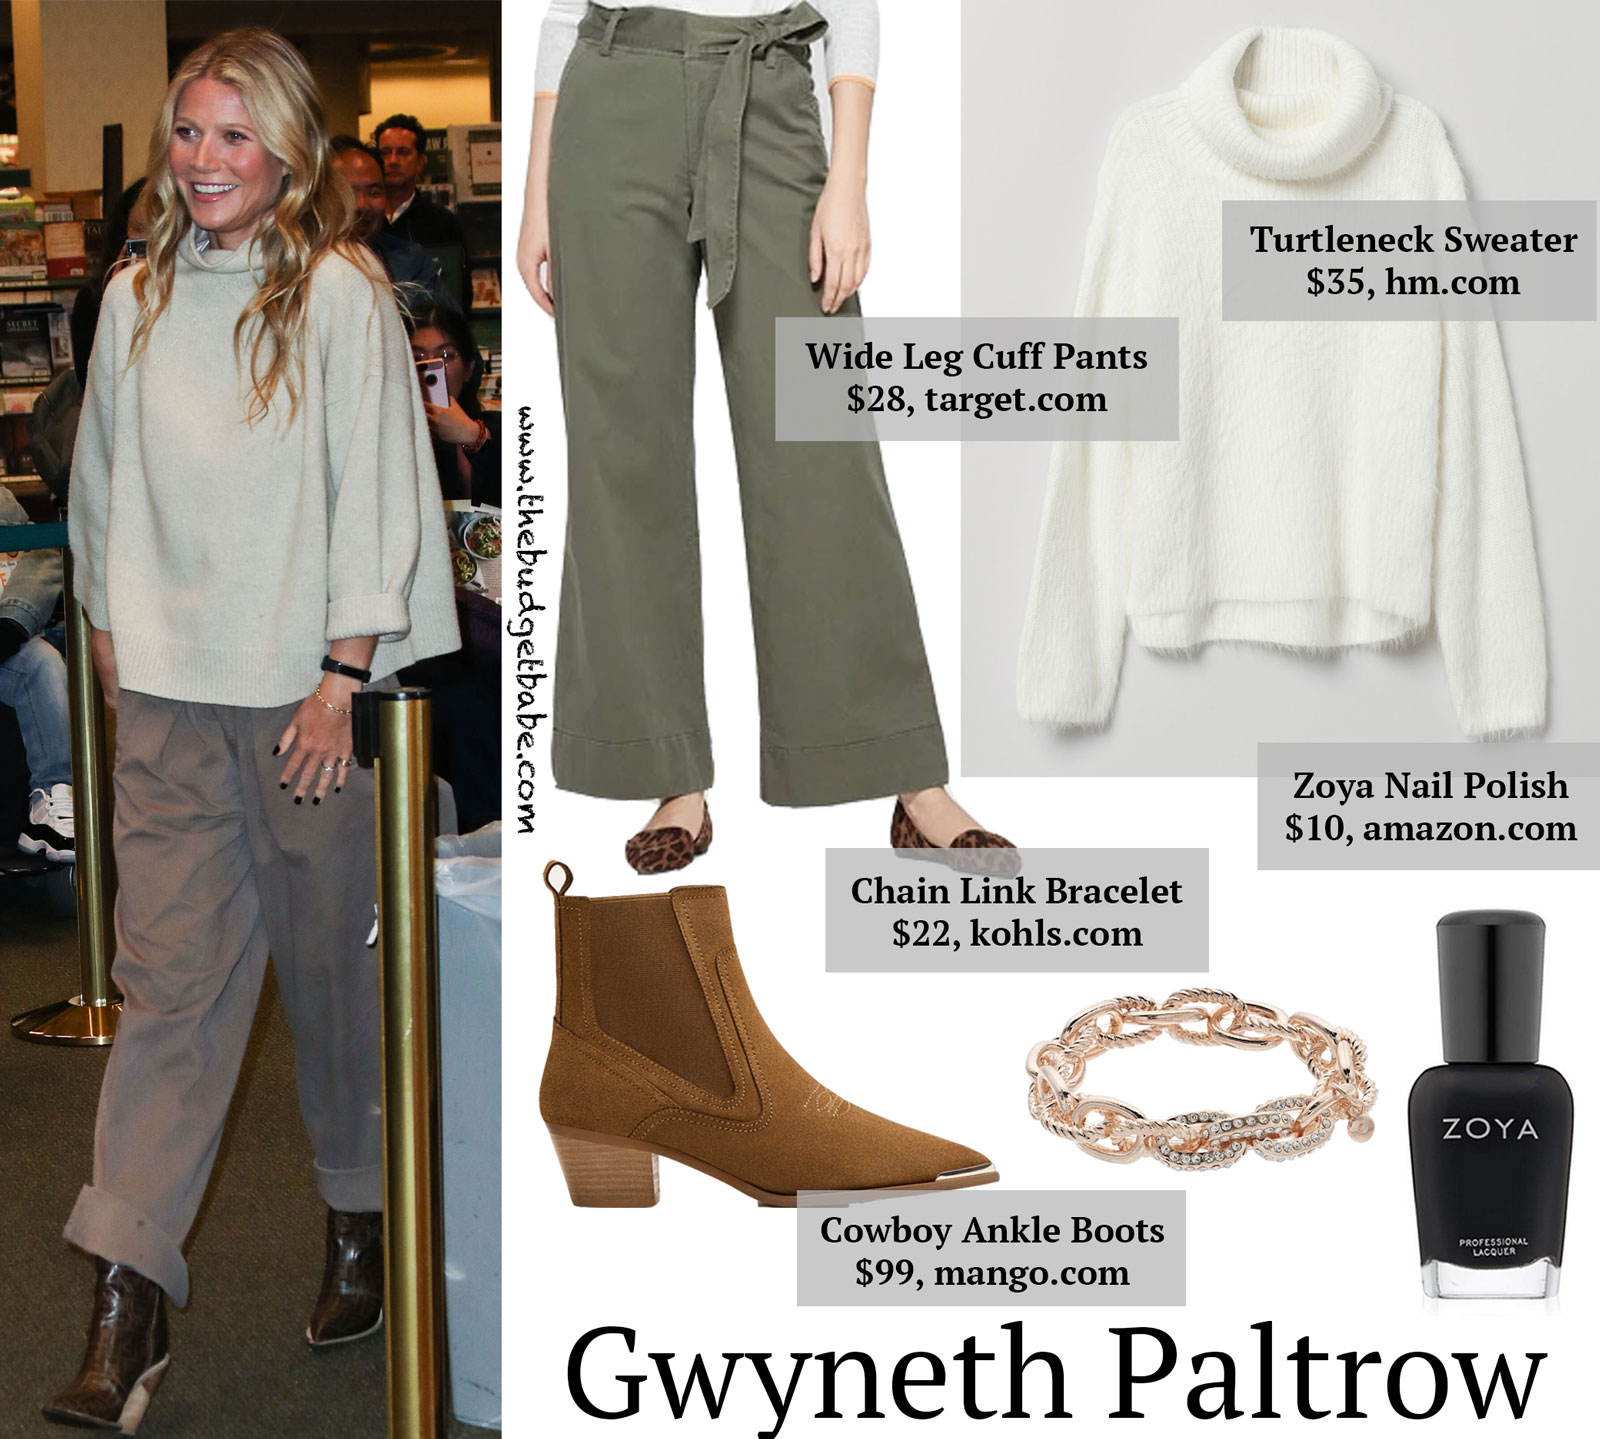 Gwyneth Paltrow Fendi Boots and Wide Leg Pants Look for Less